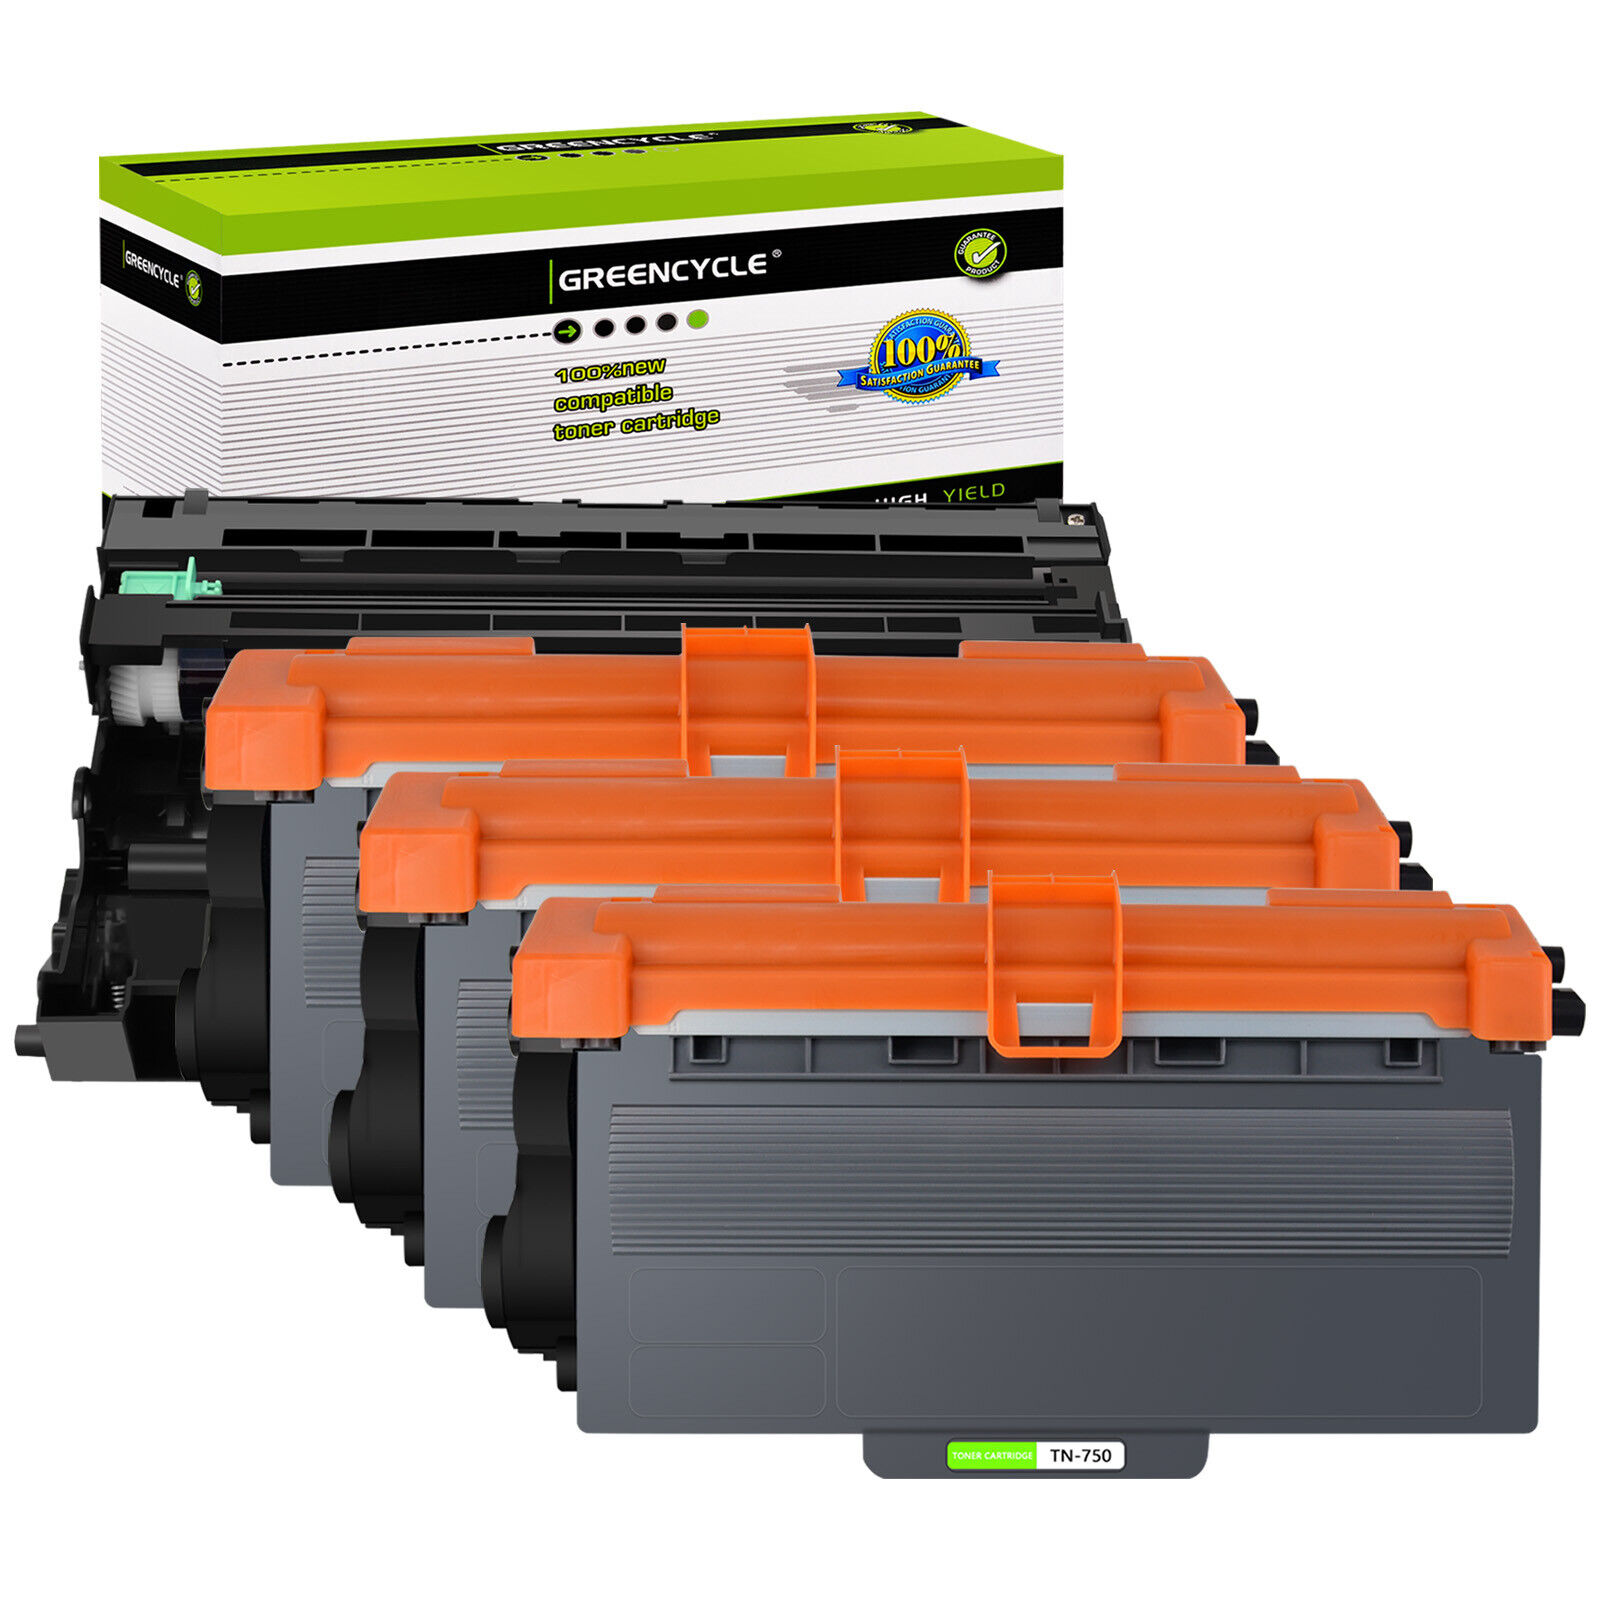 3 TN750 Toner Cartridge+1 DR720 Drum For Brother MFC-8710DW HL-5450DN DCP-8150DN